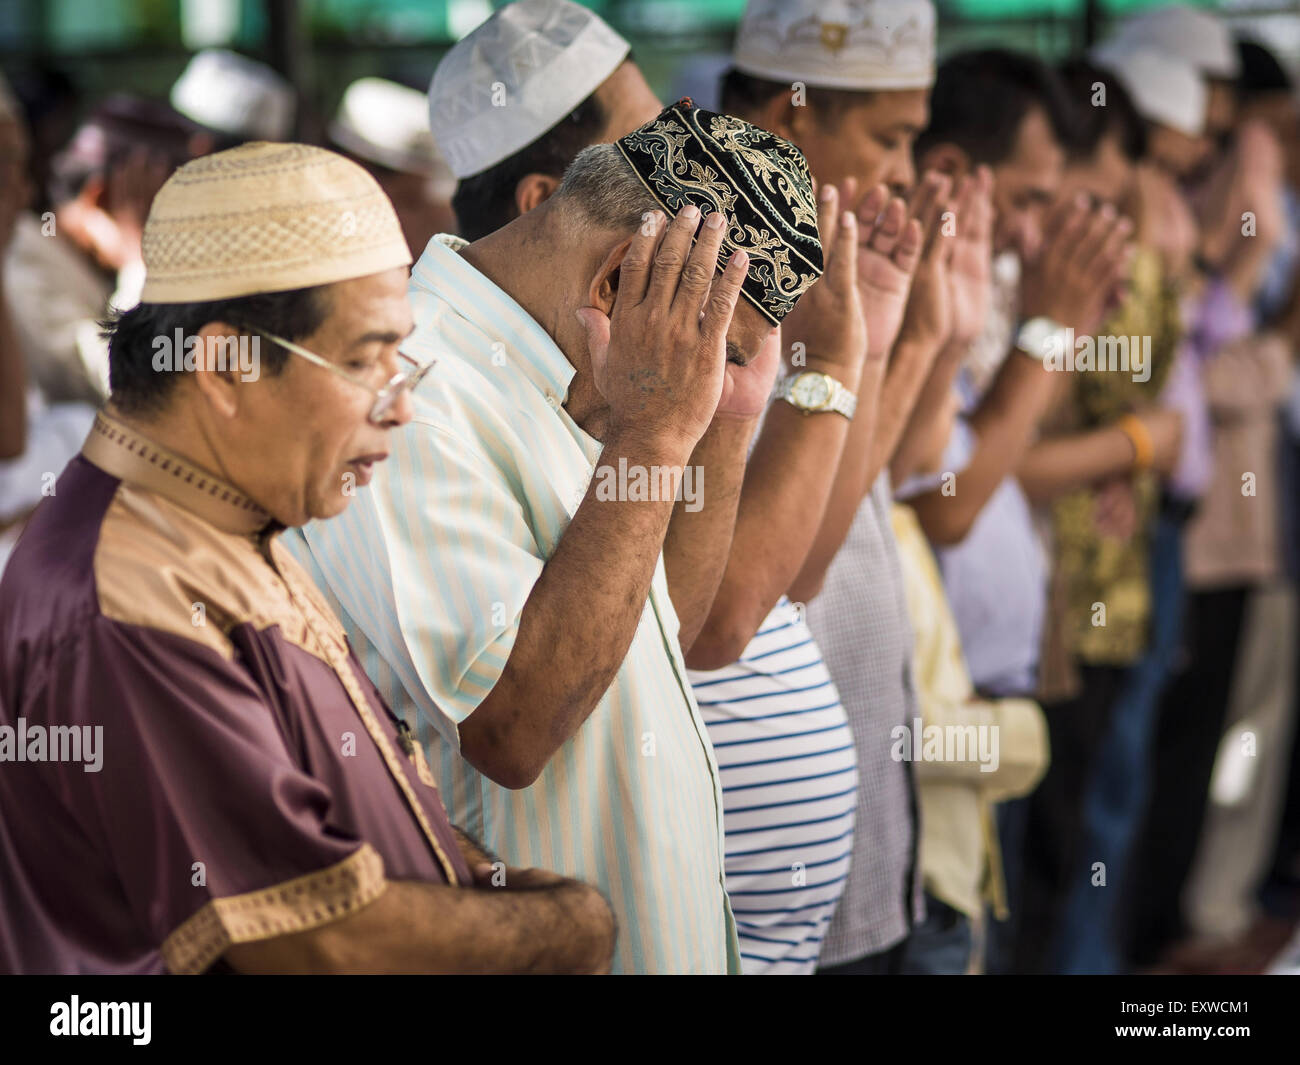 Bangkok, Thailand. 17th July, 2015. Men pray at Ton Son Mosque during services marking Eid al-Fitr. Eid al-Fitr is also called Feast of Breaking the Fast, the Sugar Feast, Bayram (Bajram), the Sweet Festival or Hari Raya Puasa and the Lesser Eid. It is an important Muslim religious holiday that marks the end of Ramadan, the Islamic holy month of fasting. Muslims are not allowed to fast on Eid. Credit:  ZUMA Press, Inc./Alamy Live News Stock Photo